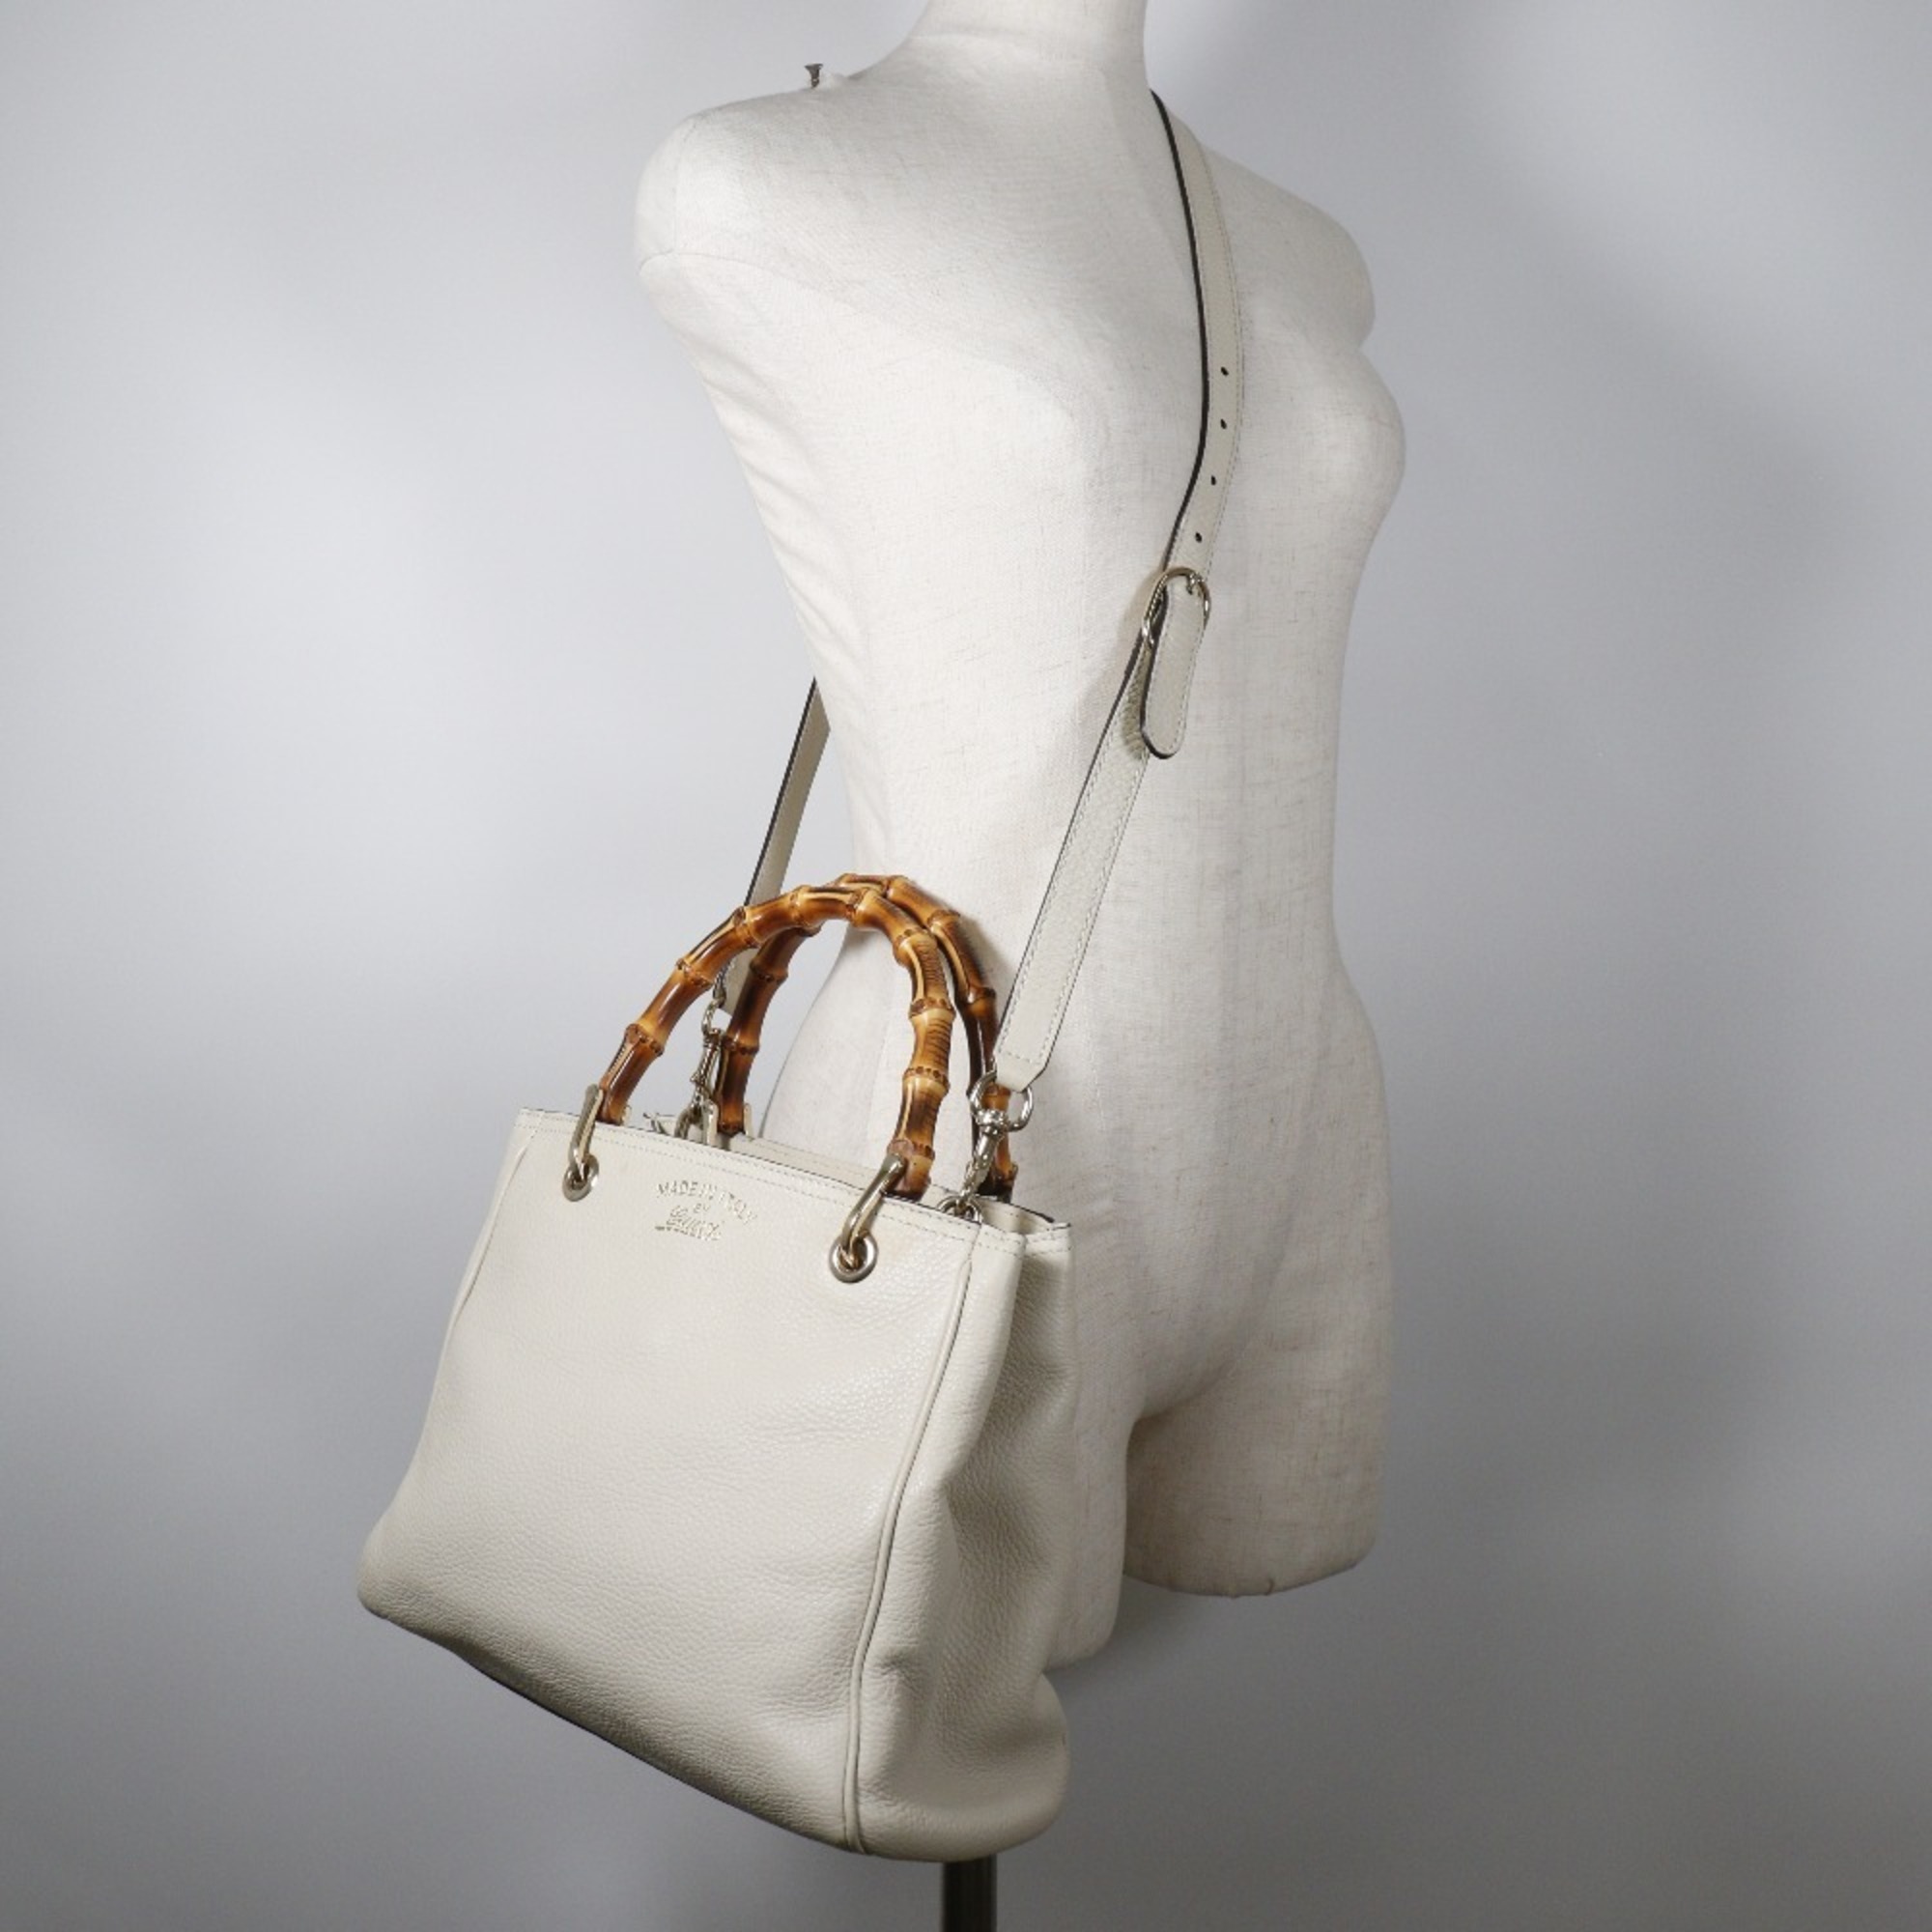 Gucci Bamboo Handbag Shoulder 336032 Leather x Canvas Off-White 2way A5 Type Women's